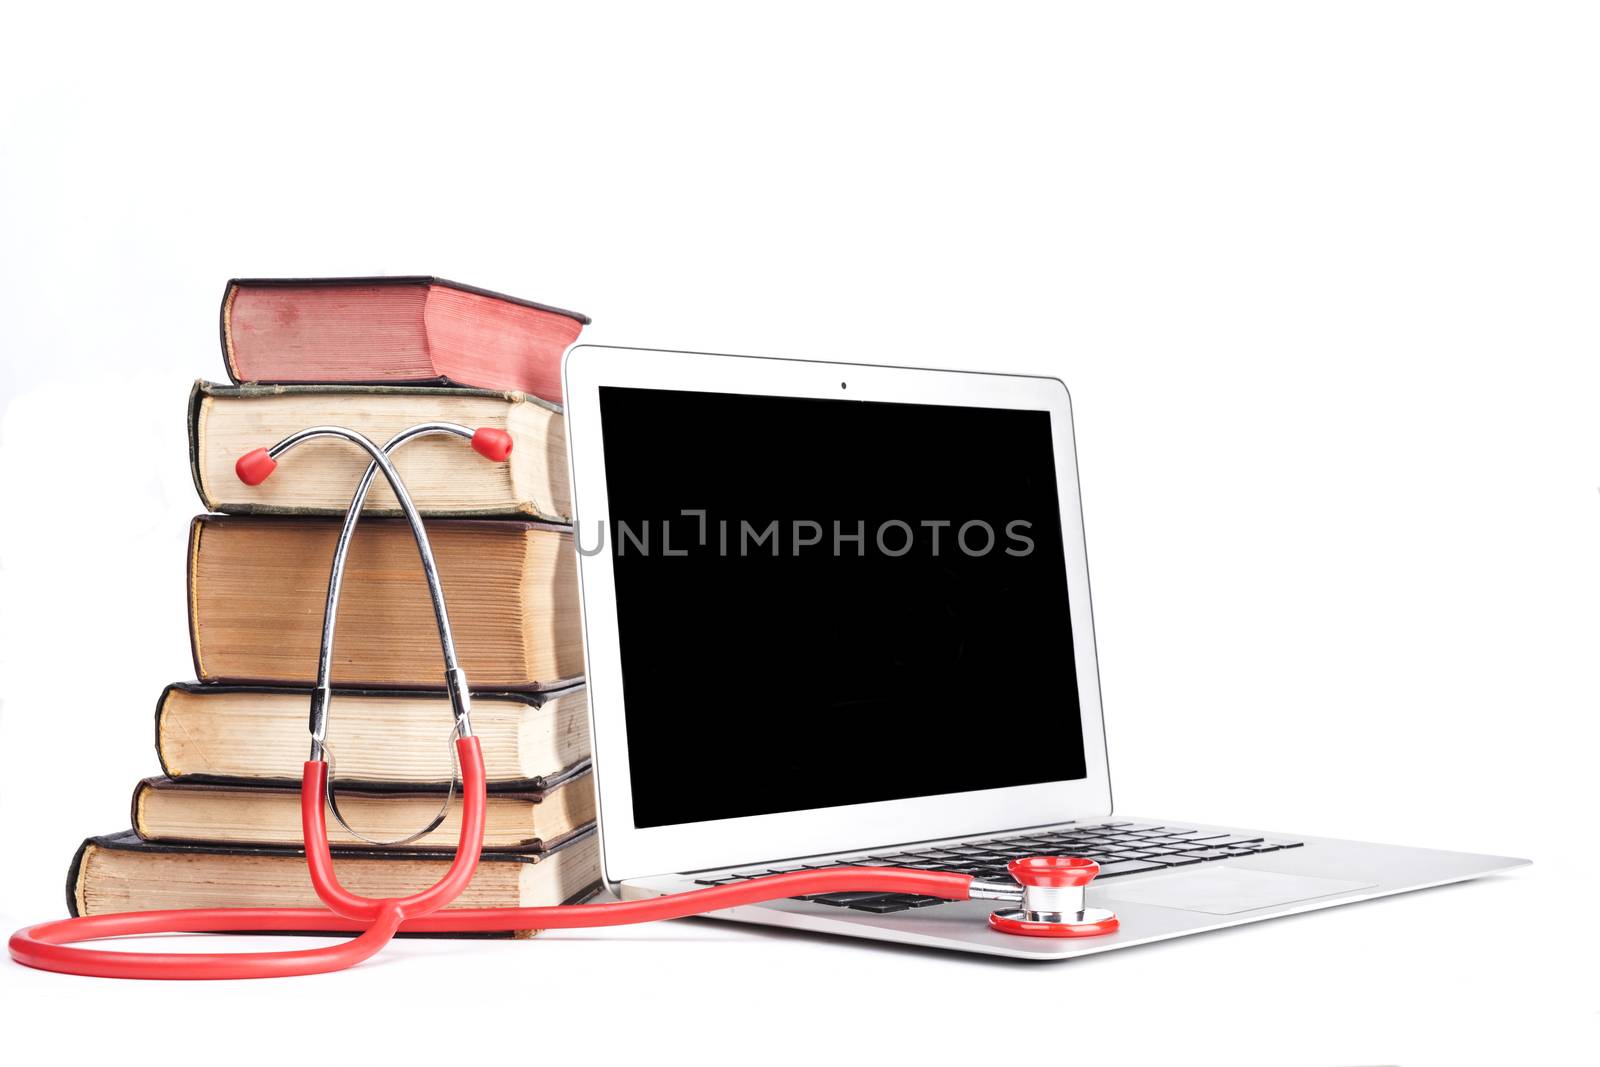 Pile of Books and Stethoscope by orcearo